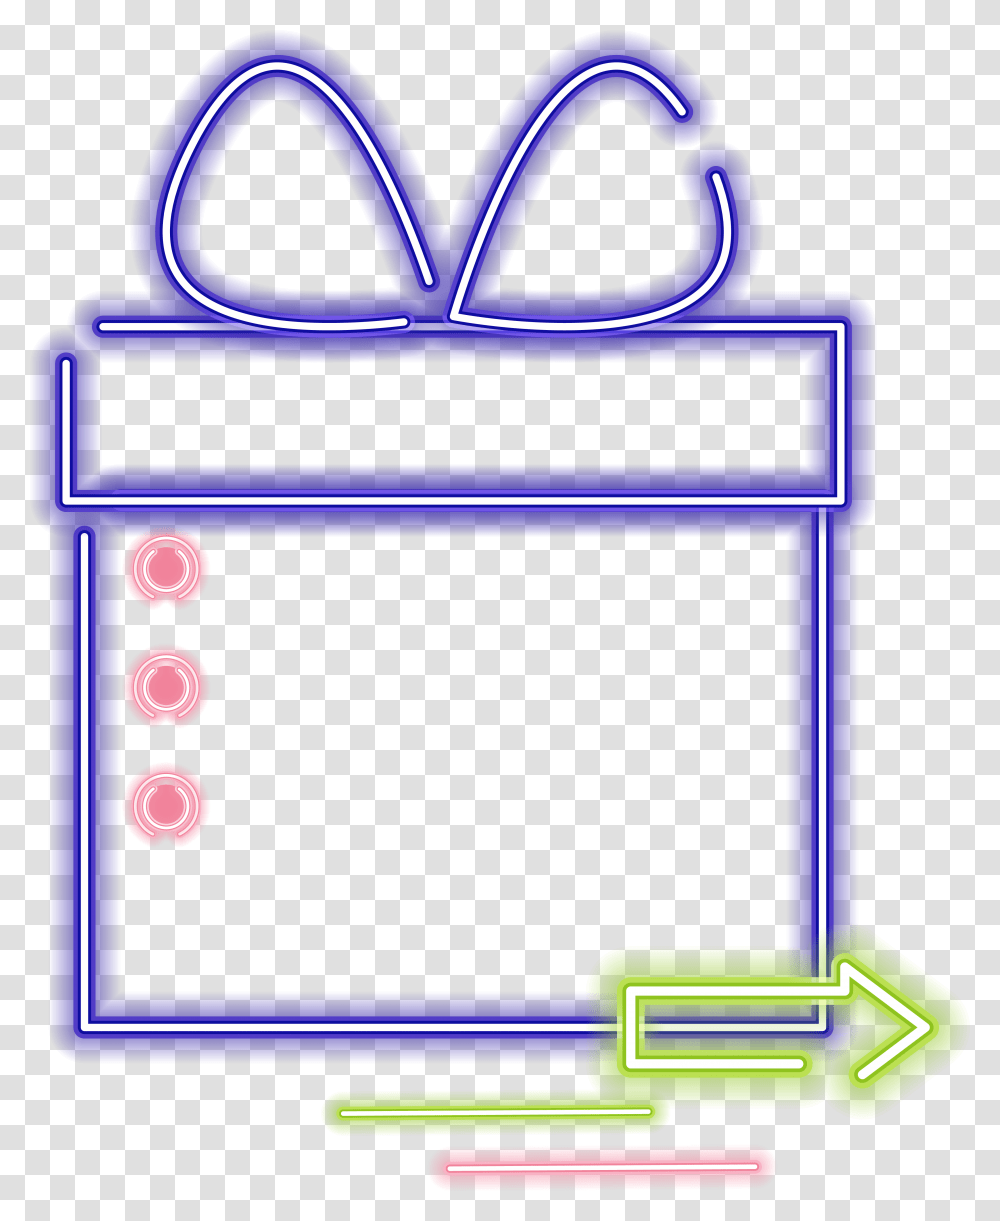 Gift Box Border Neon Element And Vector Image Neon, Word, Mailbox, Letterbox Transparent Png